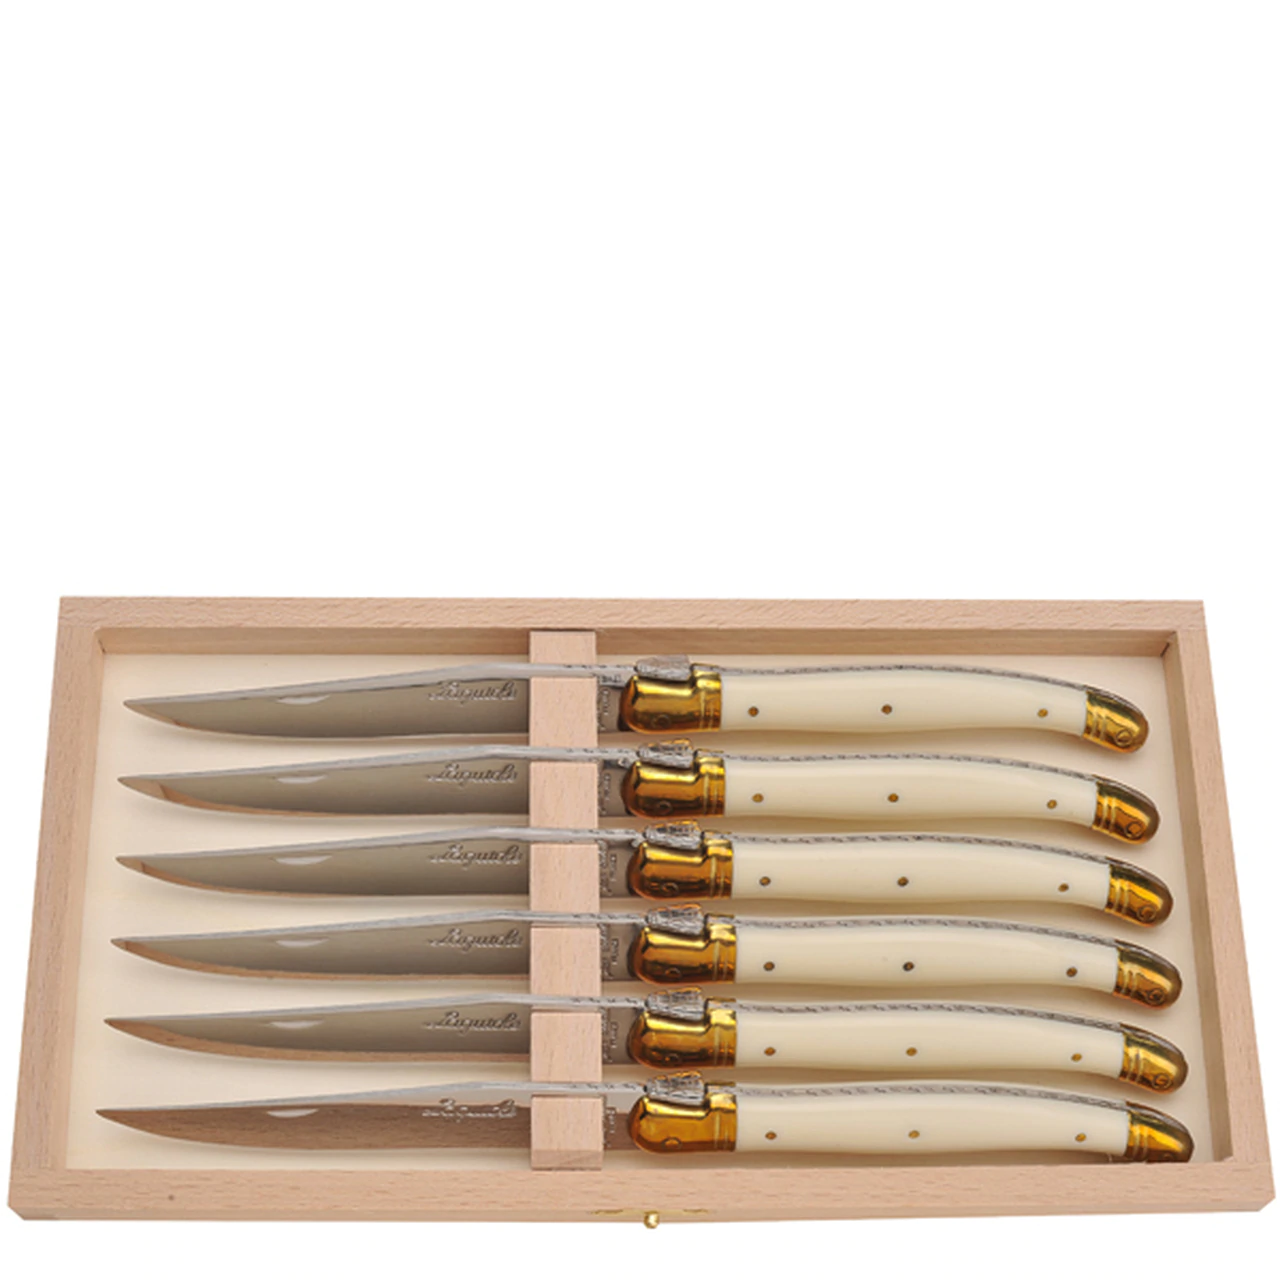 https://www.hanleywoodtexas.com/wp-content/uploads/rdi/jean-dubost-6-steak-knives-with-ivory-colored-handle-in-a-wood-box-84288_1.png